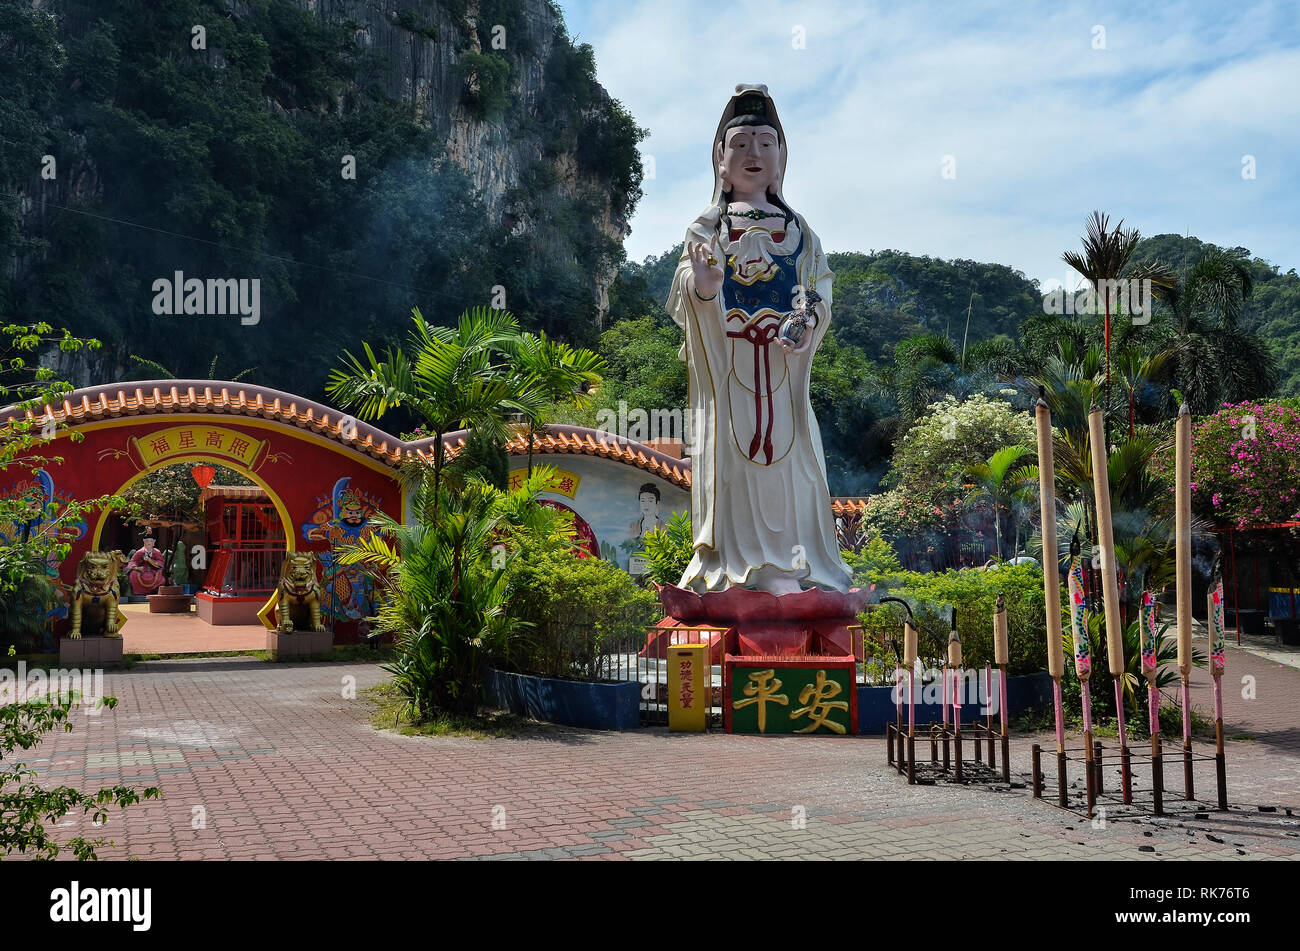 Guan Yin statue at Ling Sen Tong Cave Temple, Ipoh, Malaysia - Ling Sen Tong  is a beautiful Taoist cave temple located at the foot of a limestone hill  Stock Photo - Alamy